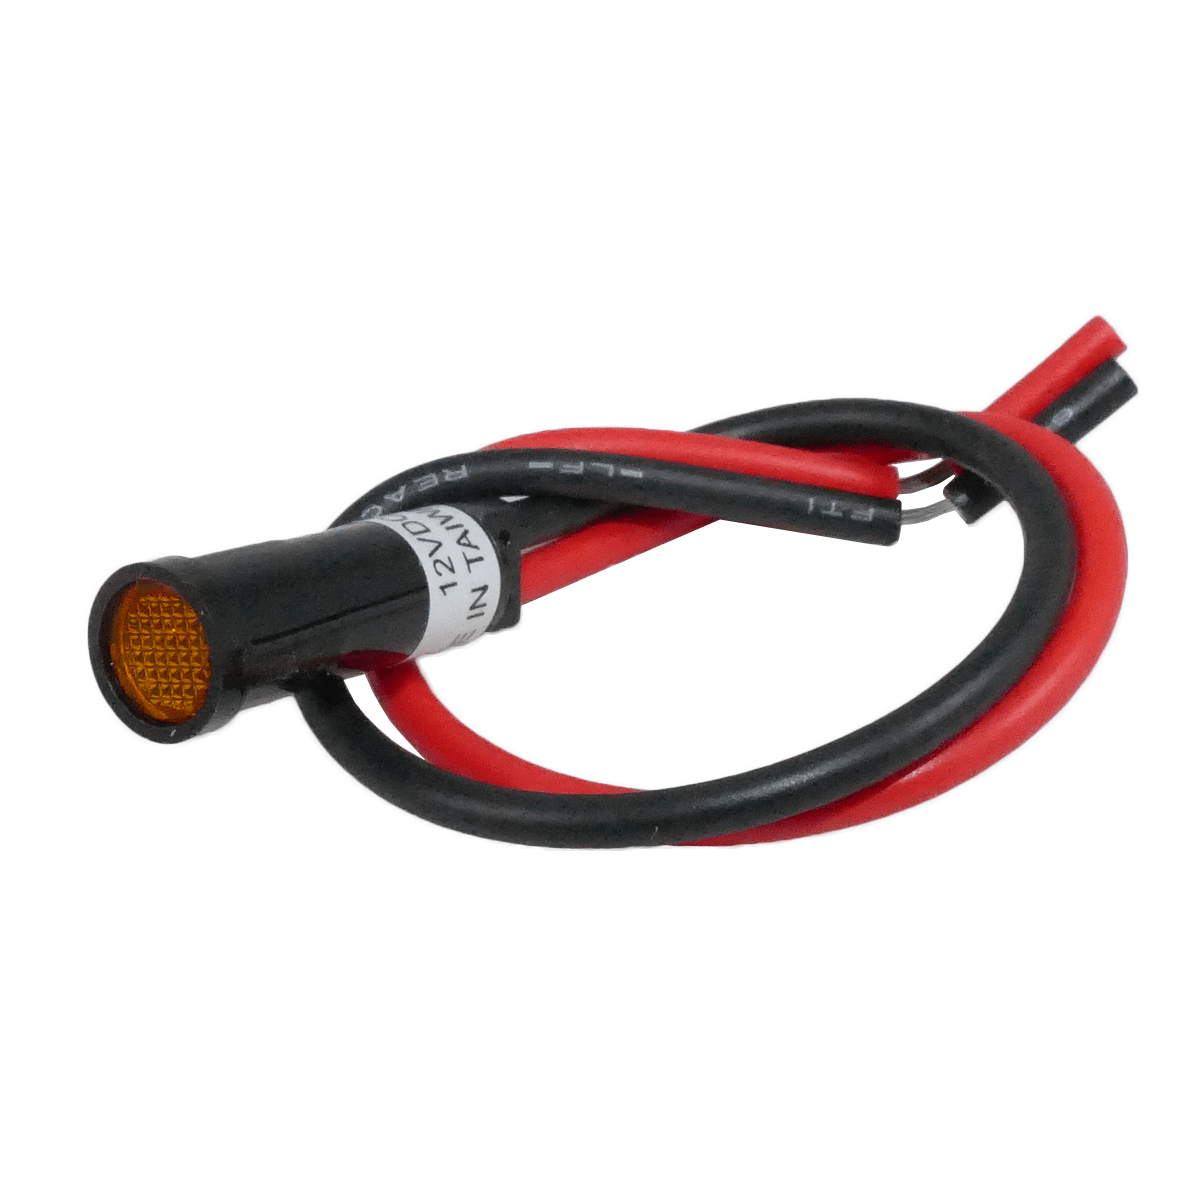 12-Volt DC Indicator Lights in Red, Green and Amber